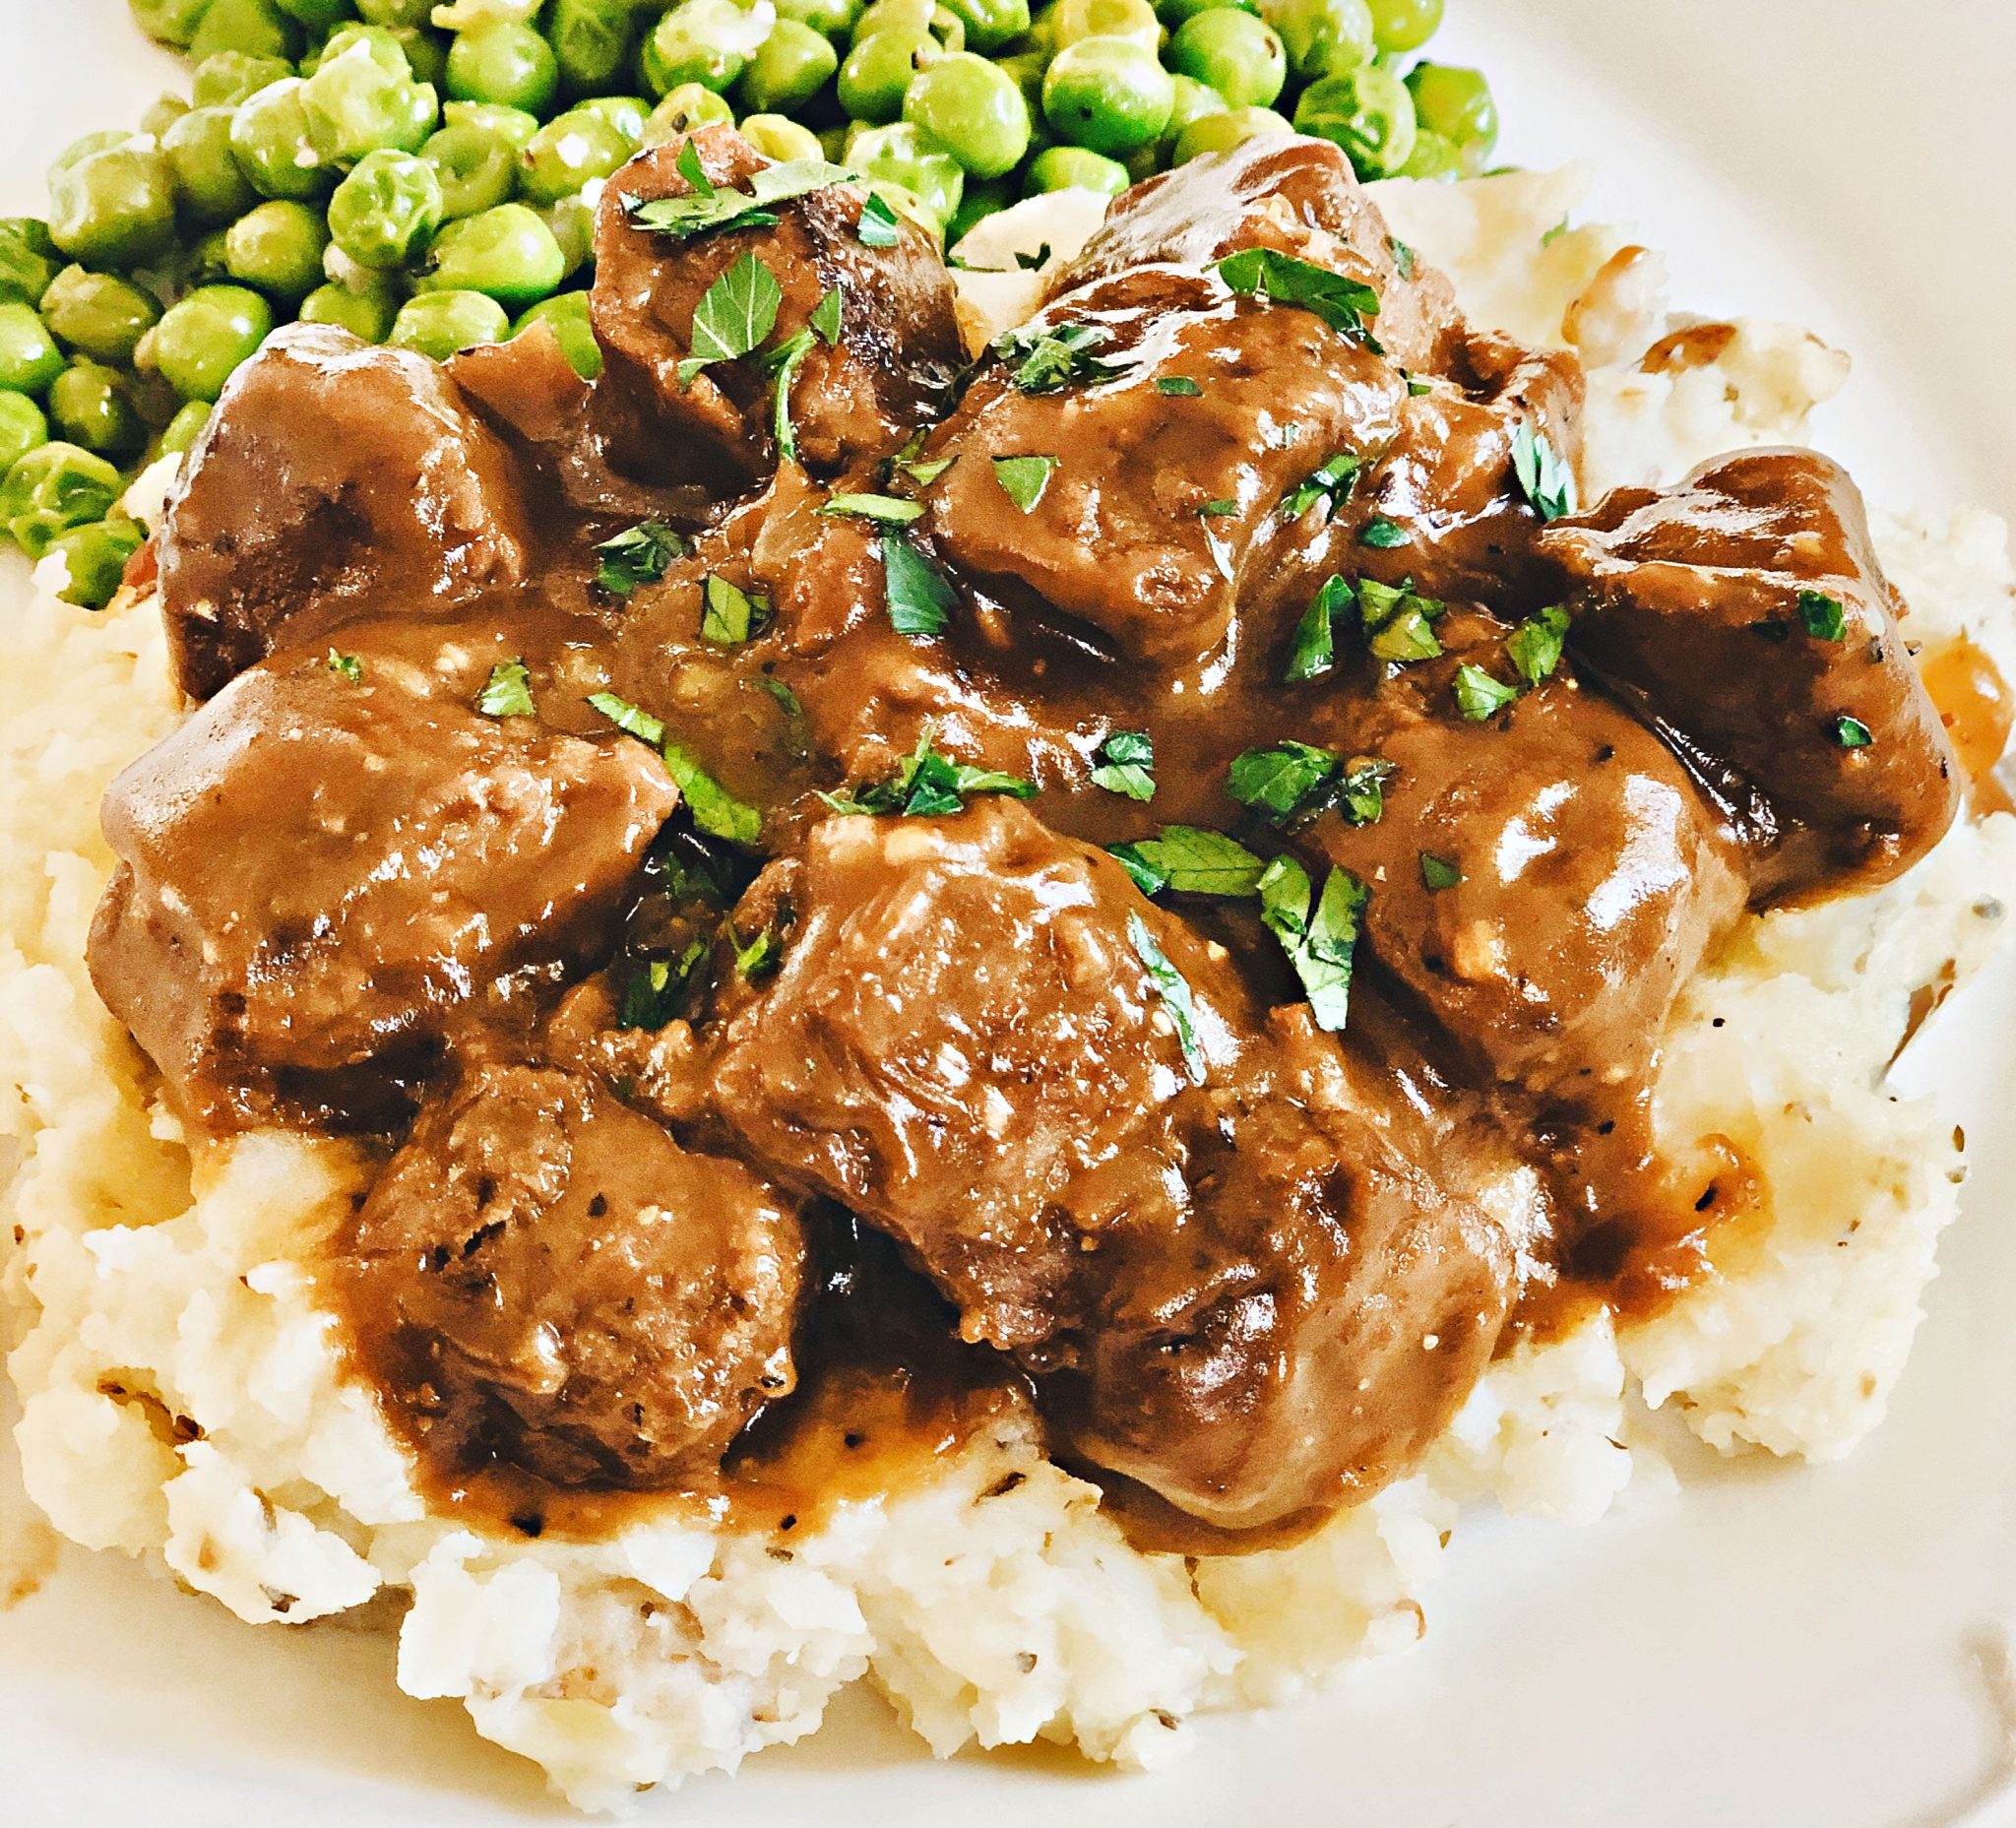 Vegan Beef Tips and Gravy Recipe - This Wife Cooks